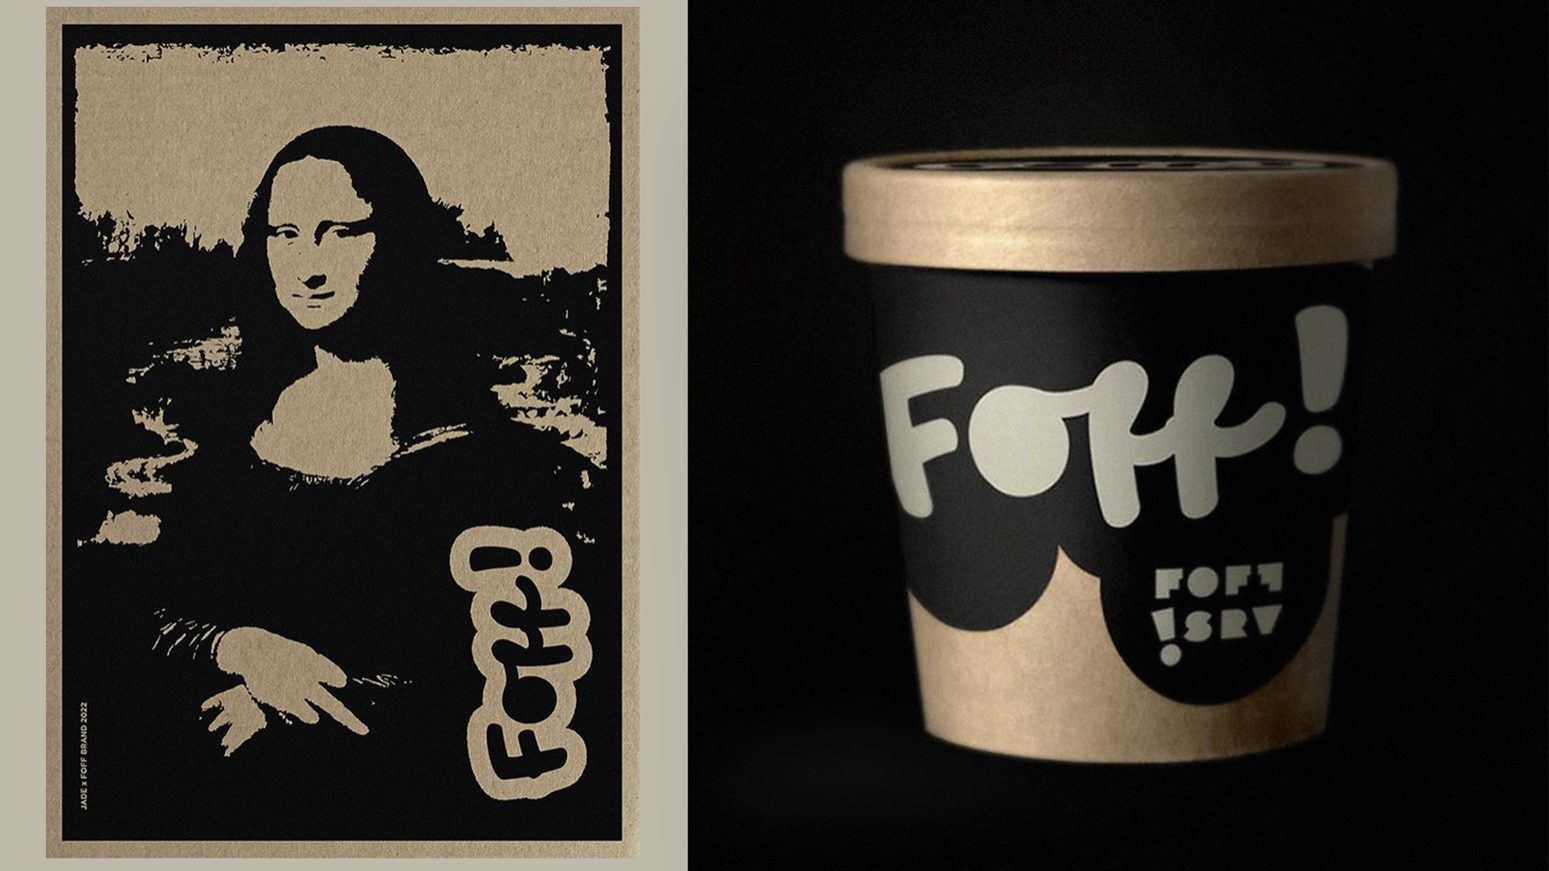 Foff!’s Ice Cream Packaging Ventures Into The Street Style Aesthetic